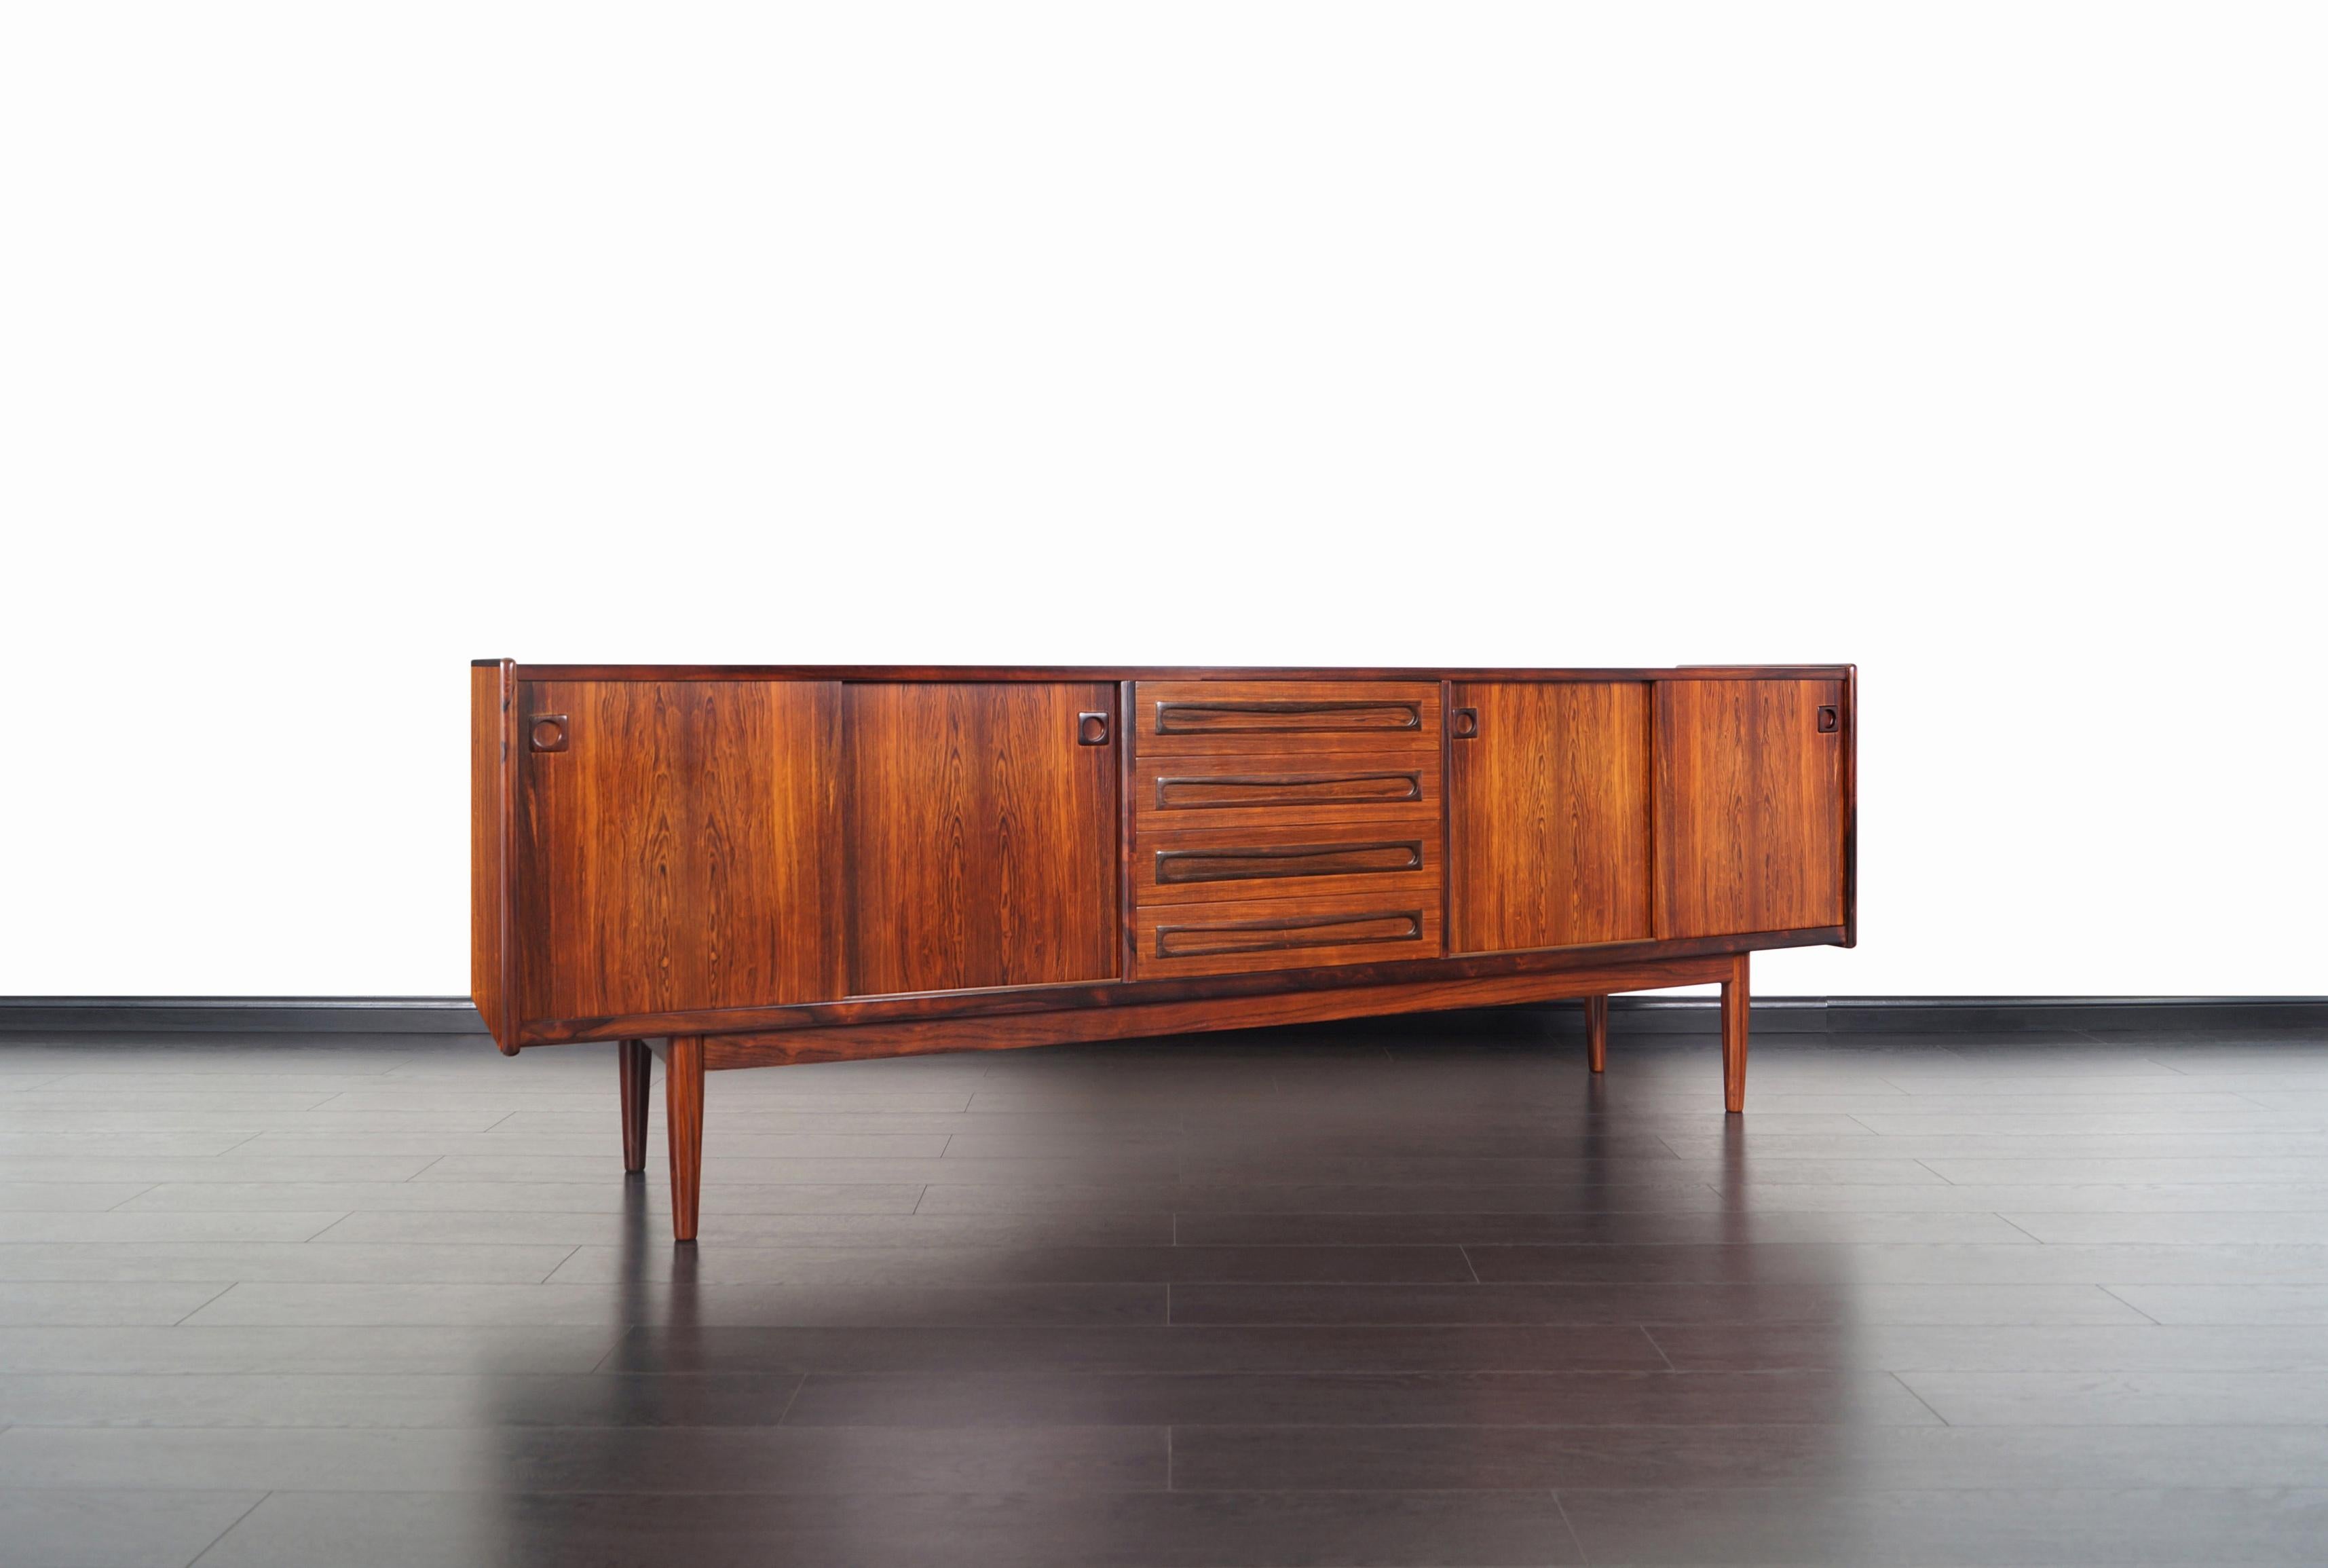 Exceptional Danish Brazilian rosewood credenza designed by Johannes Andersen for Uldum Møbelfabrik, Denmark, 1960s. This skillfully crafted credenza is comprised of sliding doors with adjustable shelves and four dovetailed drawers in the center, all